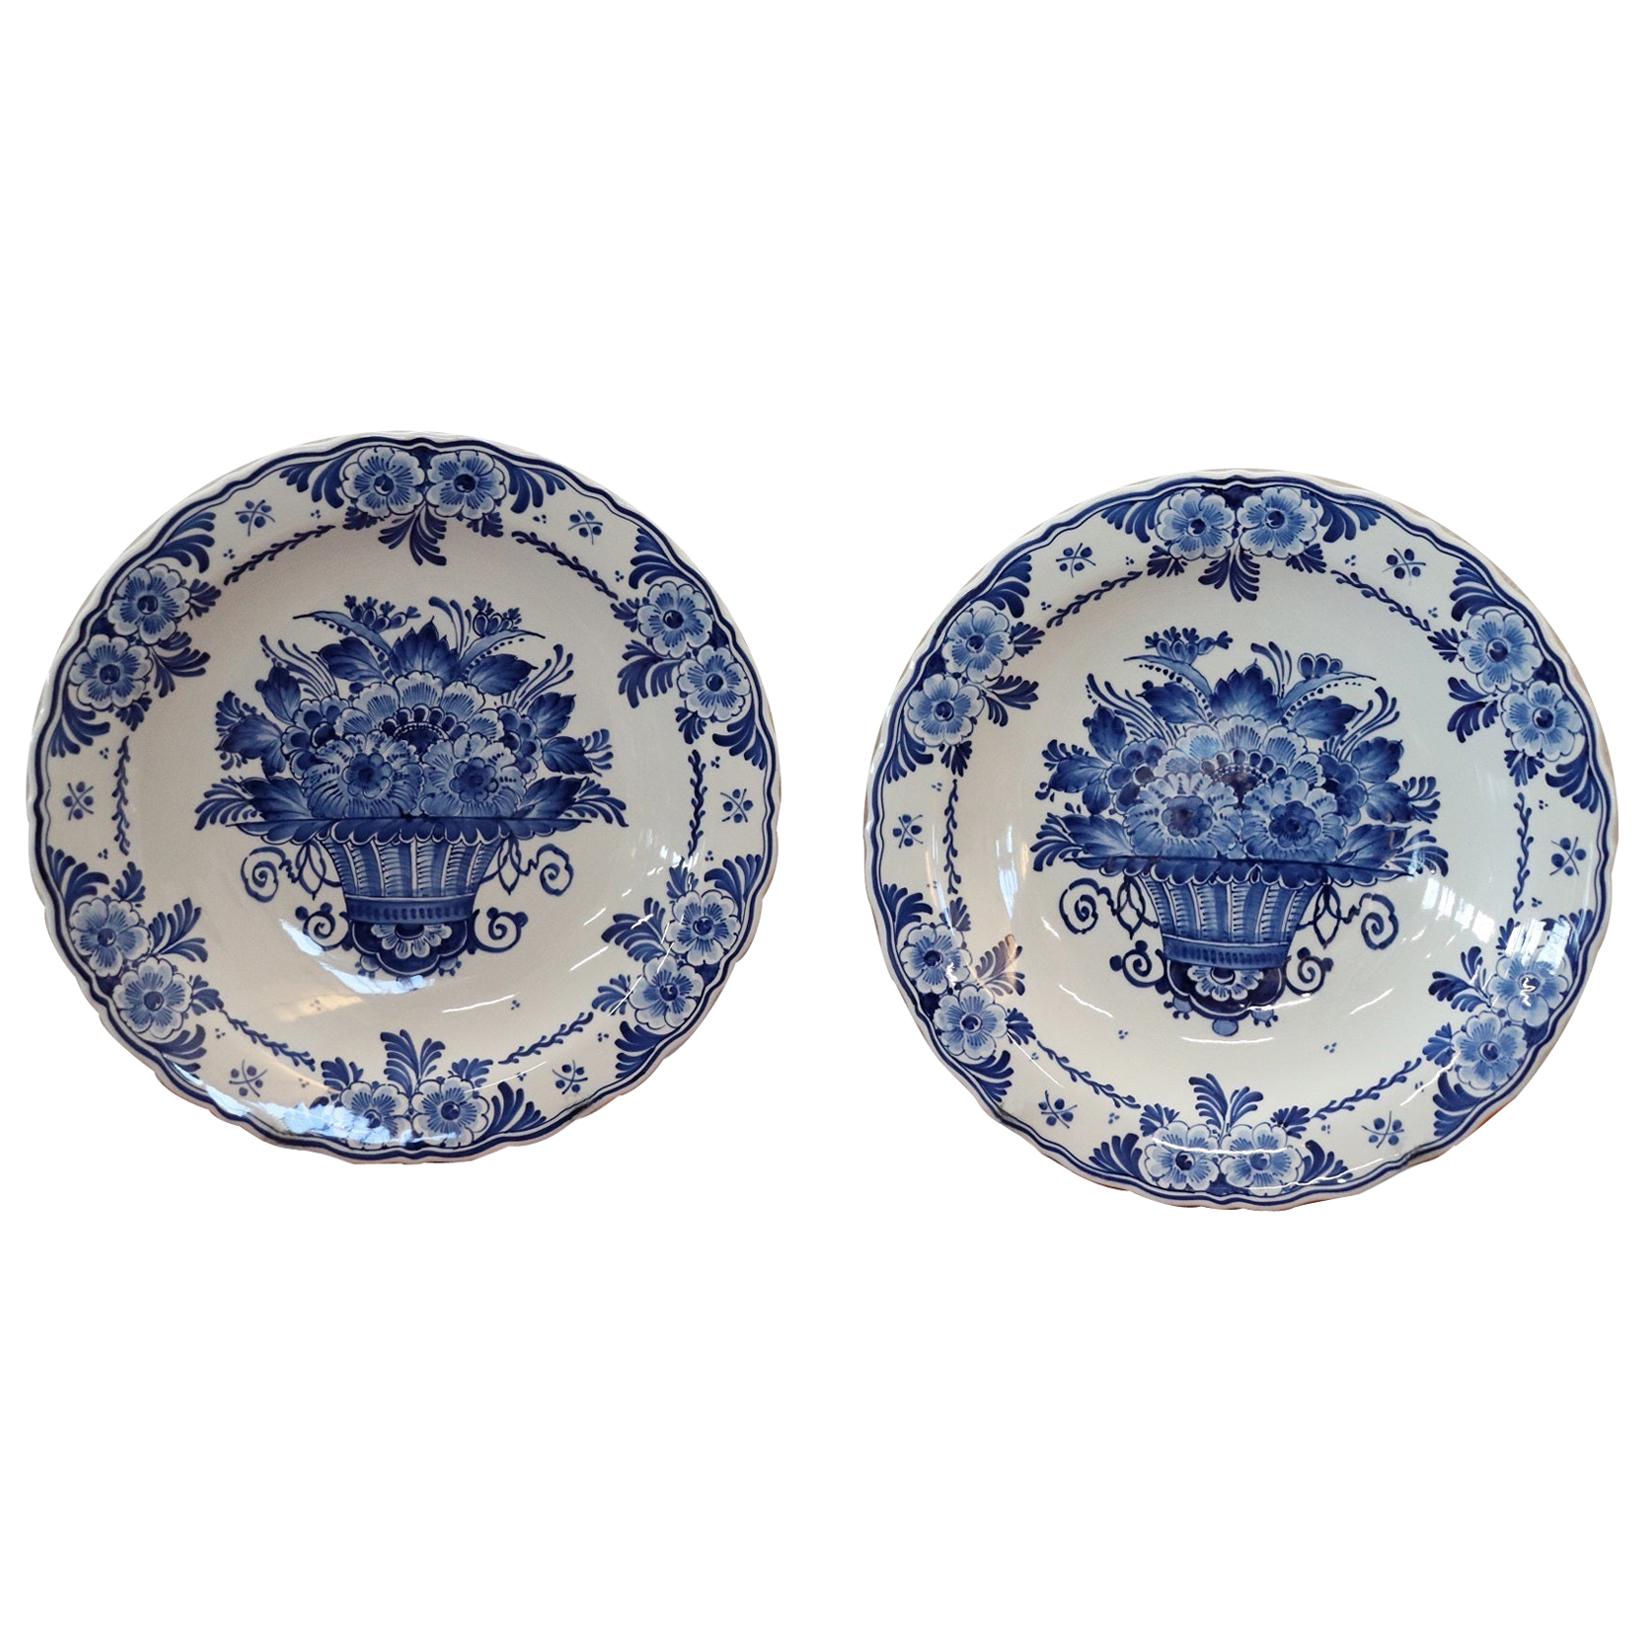 20th Century Holland Ceramic Platters with Blue Floreal Decorations by Delft